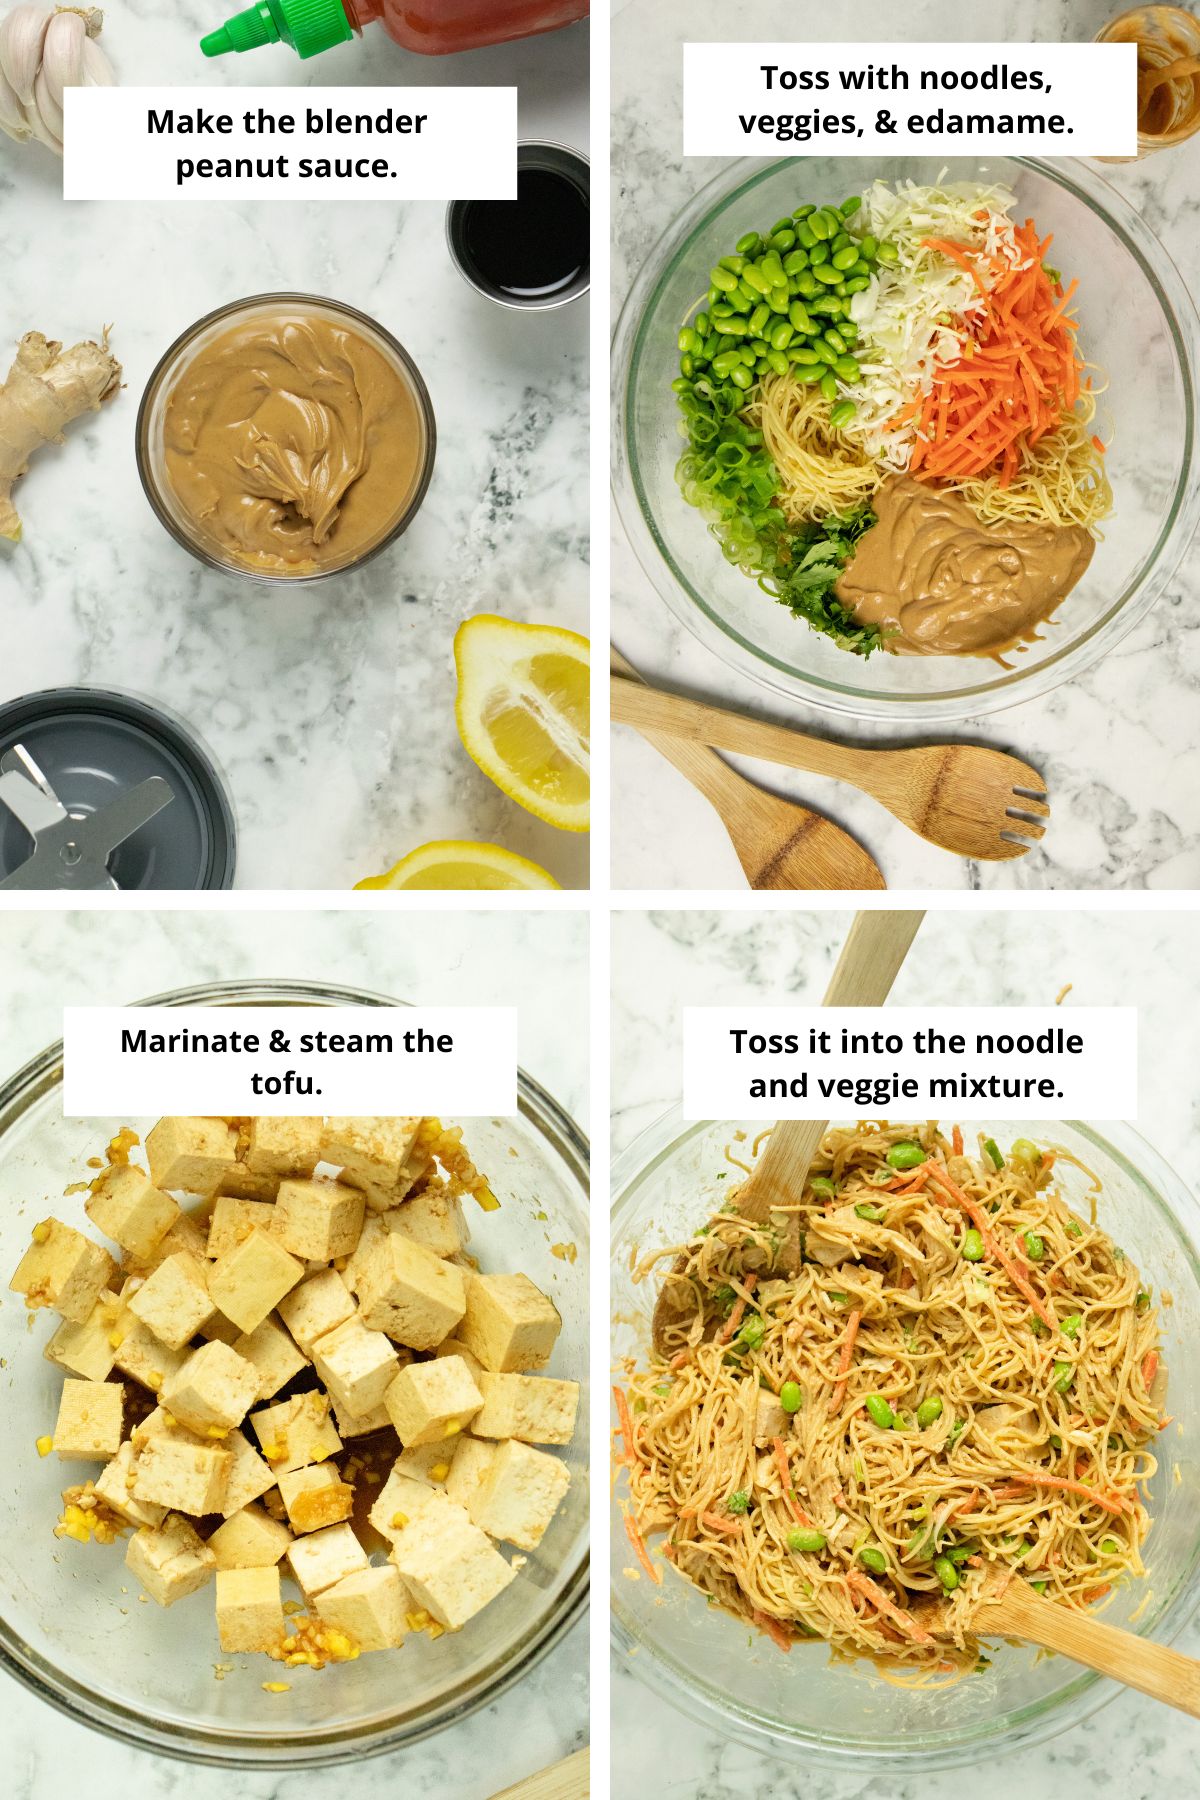 image collage showing the peanut sauce ingredients, the noodles with veggies and edamame before tossing together, the tofu marinating, and the finished salad in the mixing bowl